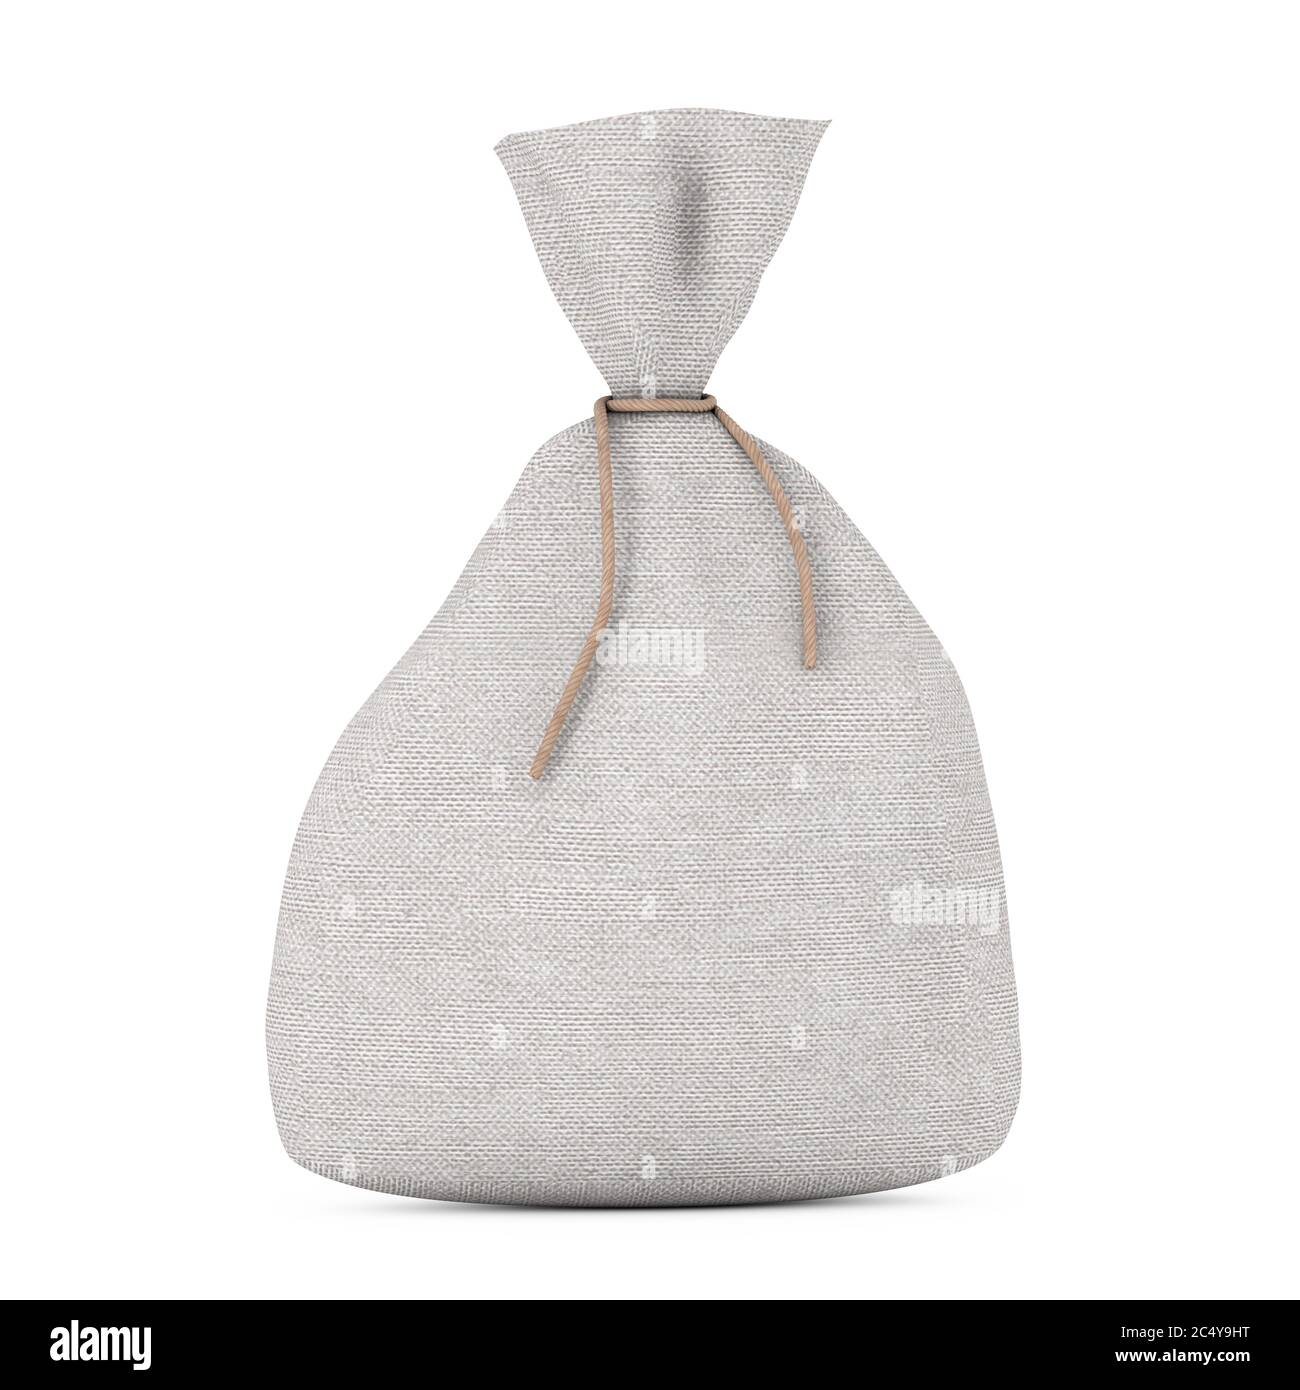 Tied Rustic Canvas Linen Sack or Bag with Free Space for Yours Design on a white background. 3d Rendering Stock Photo